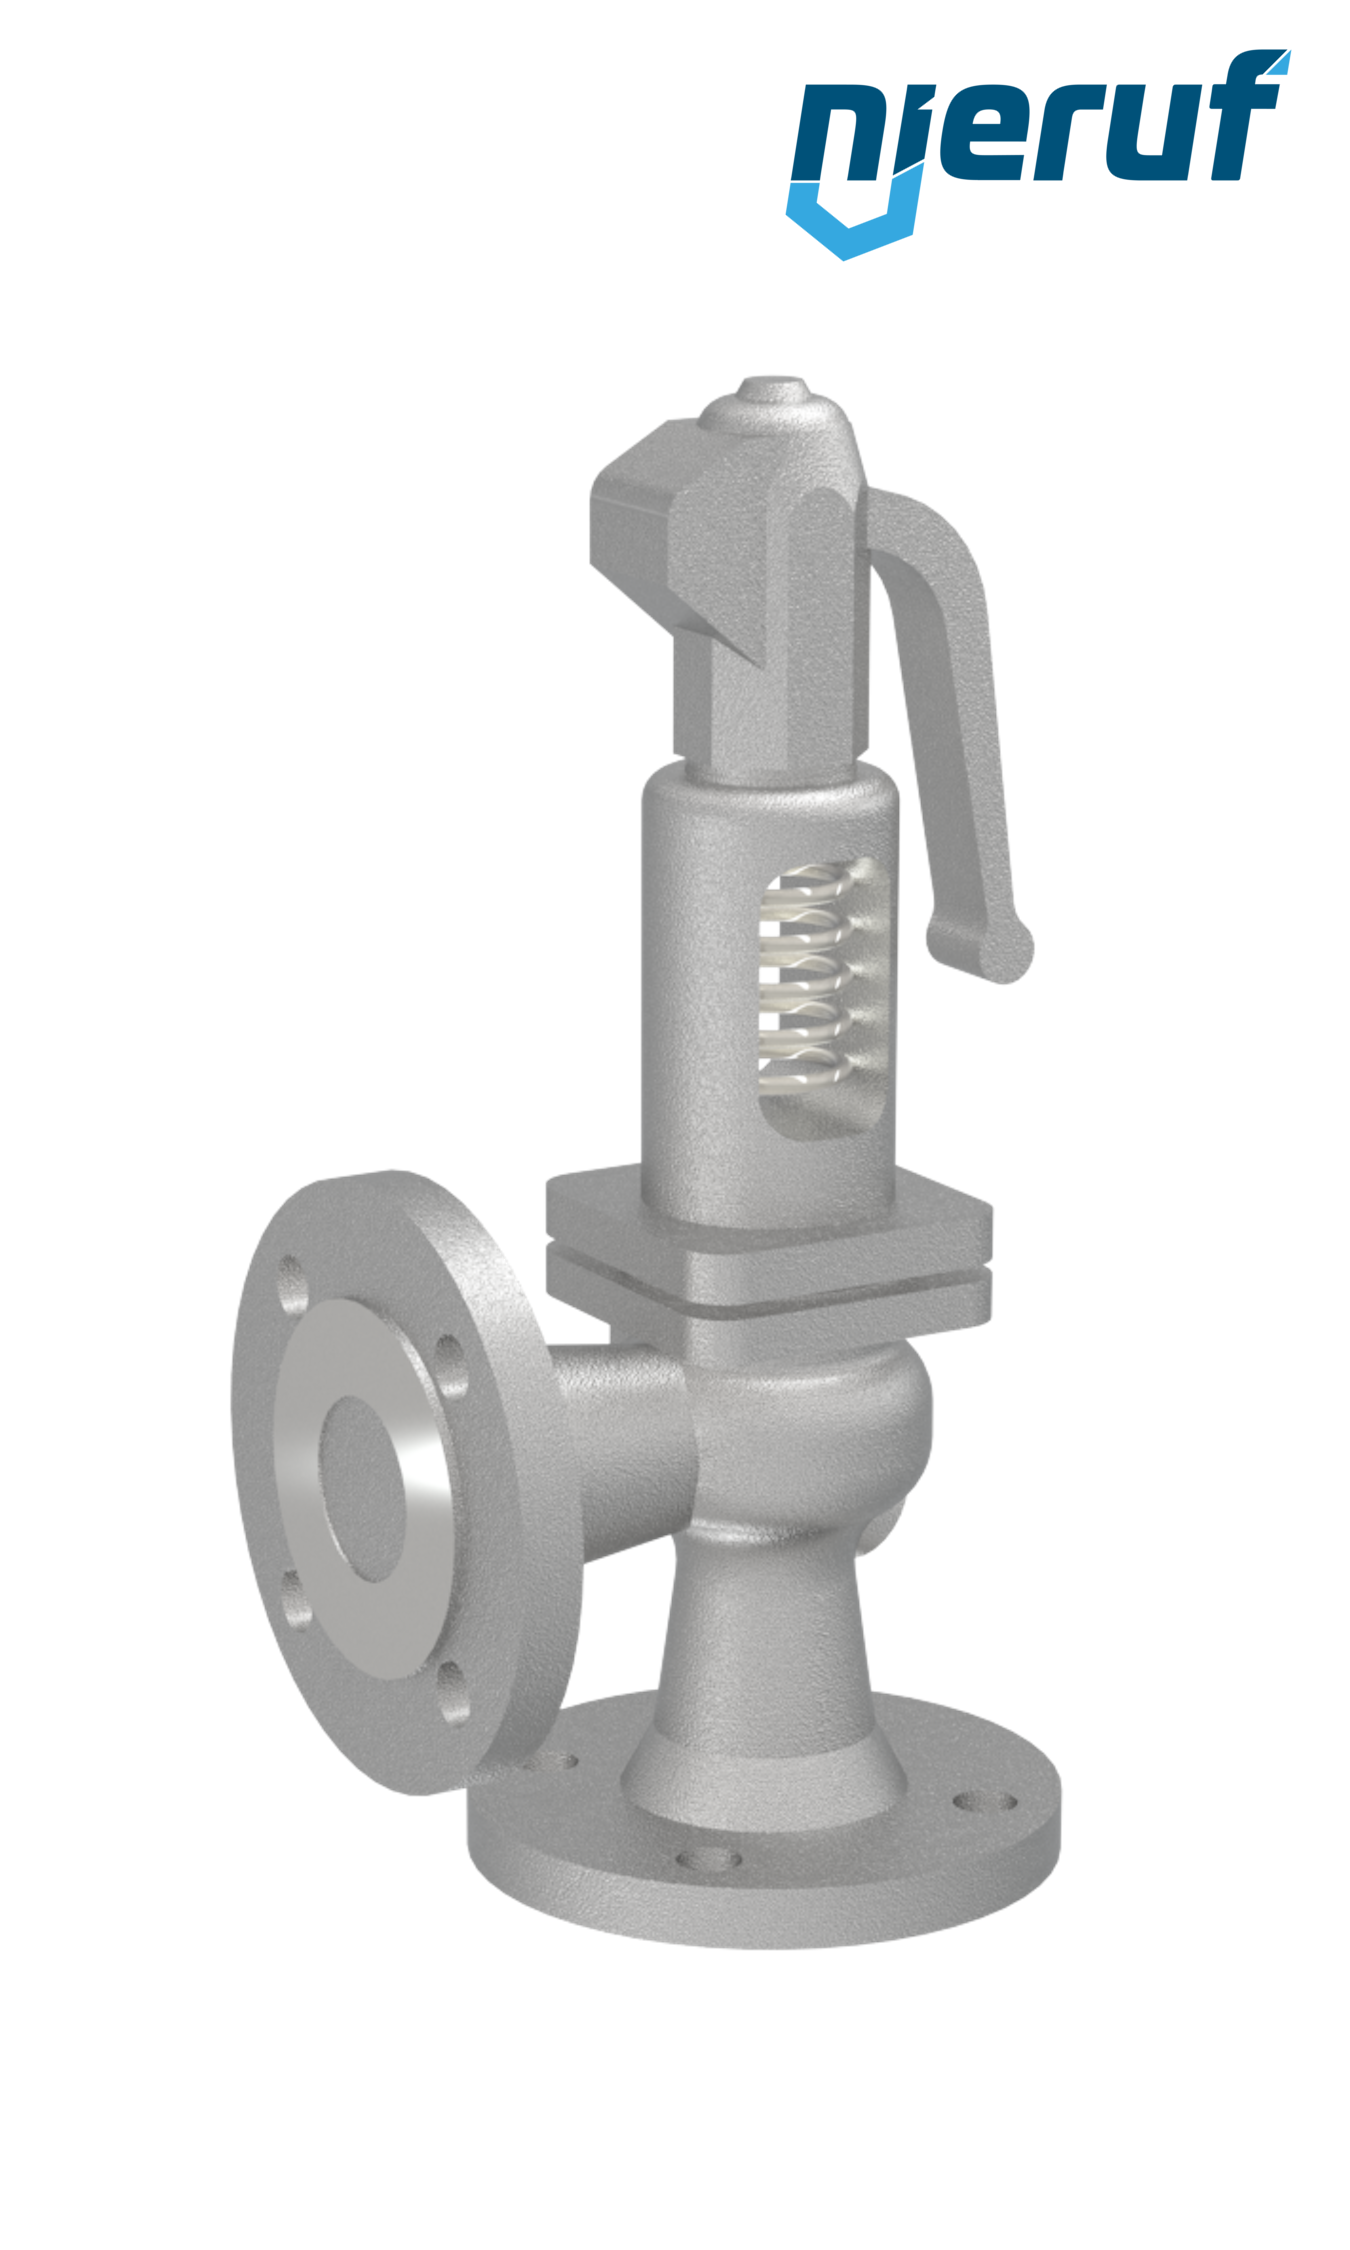 flange-safety valve DN50/DN50 SF0202, cast steel EPDM, with lever